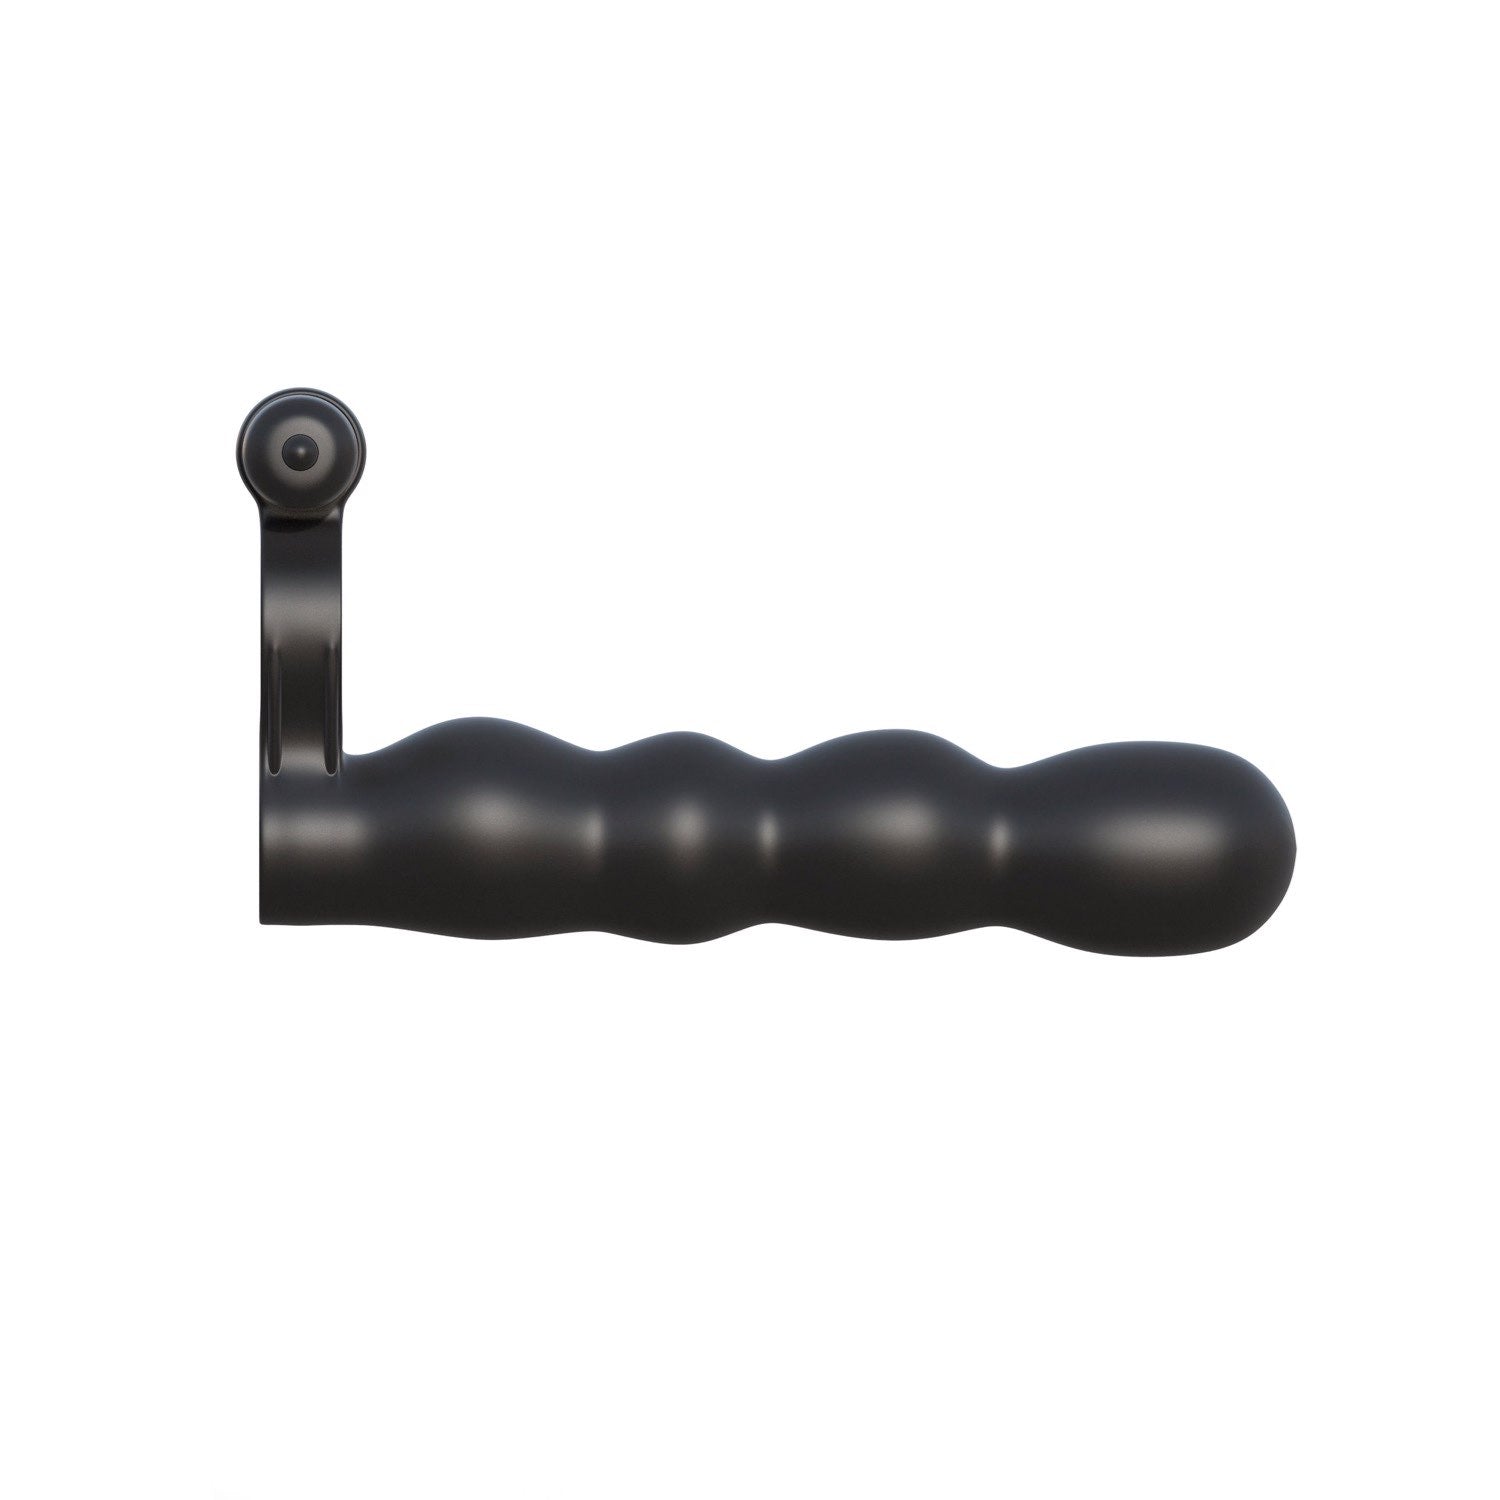 Fantasy C-Ringz Fantasy C-ringz Posable Partner Double Penetrator - Black Vibrating Cock Ring with Anal Penetrator by Pipedream